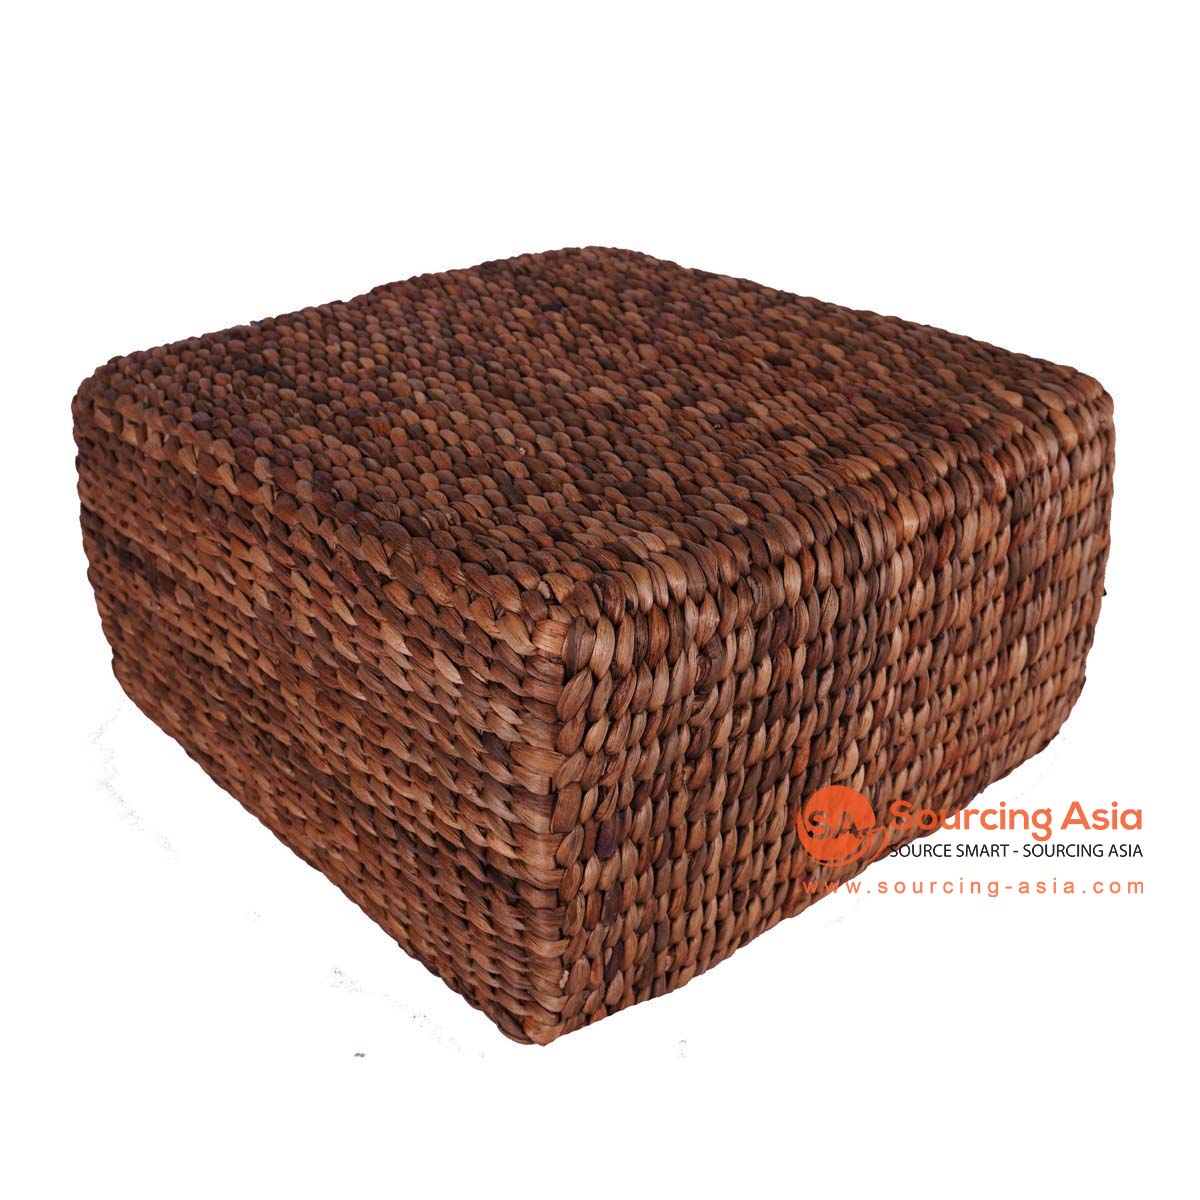 HBSC601 NATURAL WATER HYACINTH SQUARE FOOT POUFFE